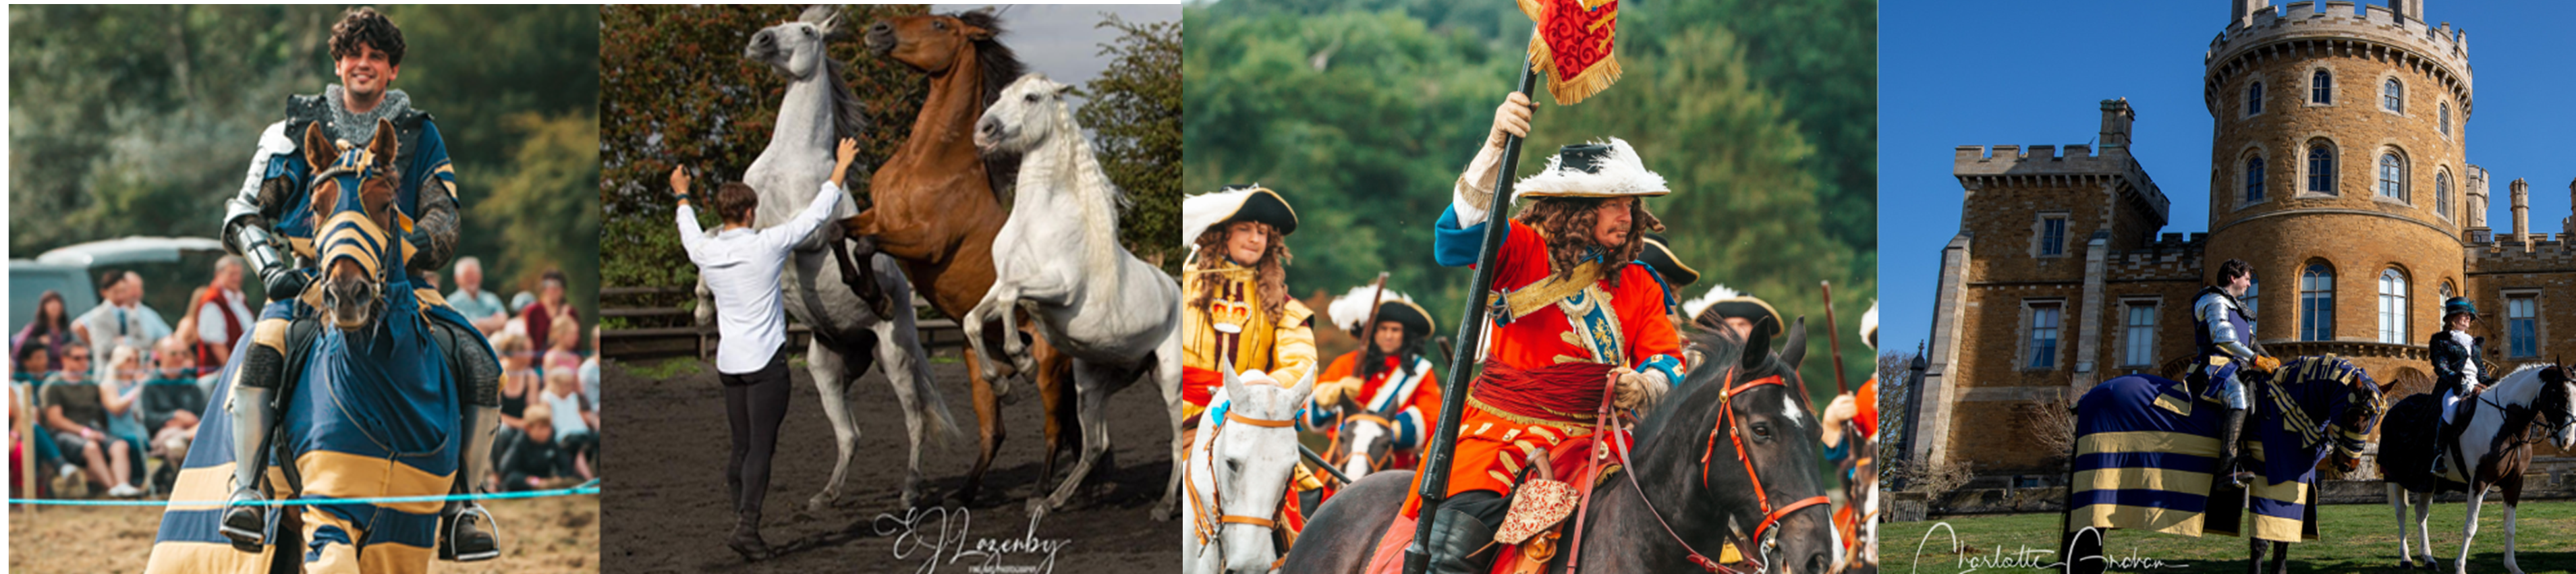 4 images of Festival of the Horse acts